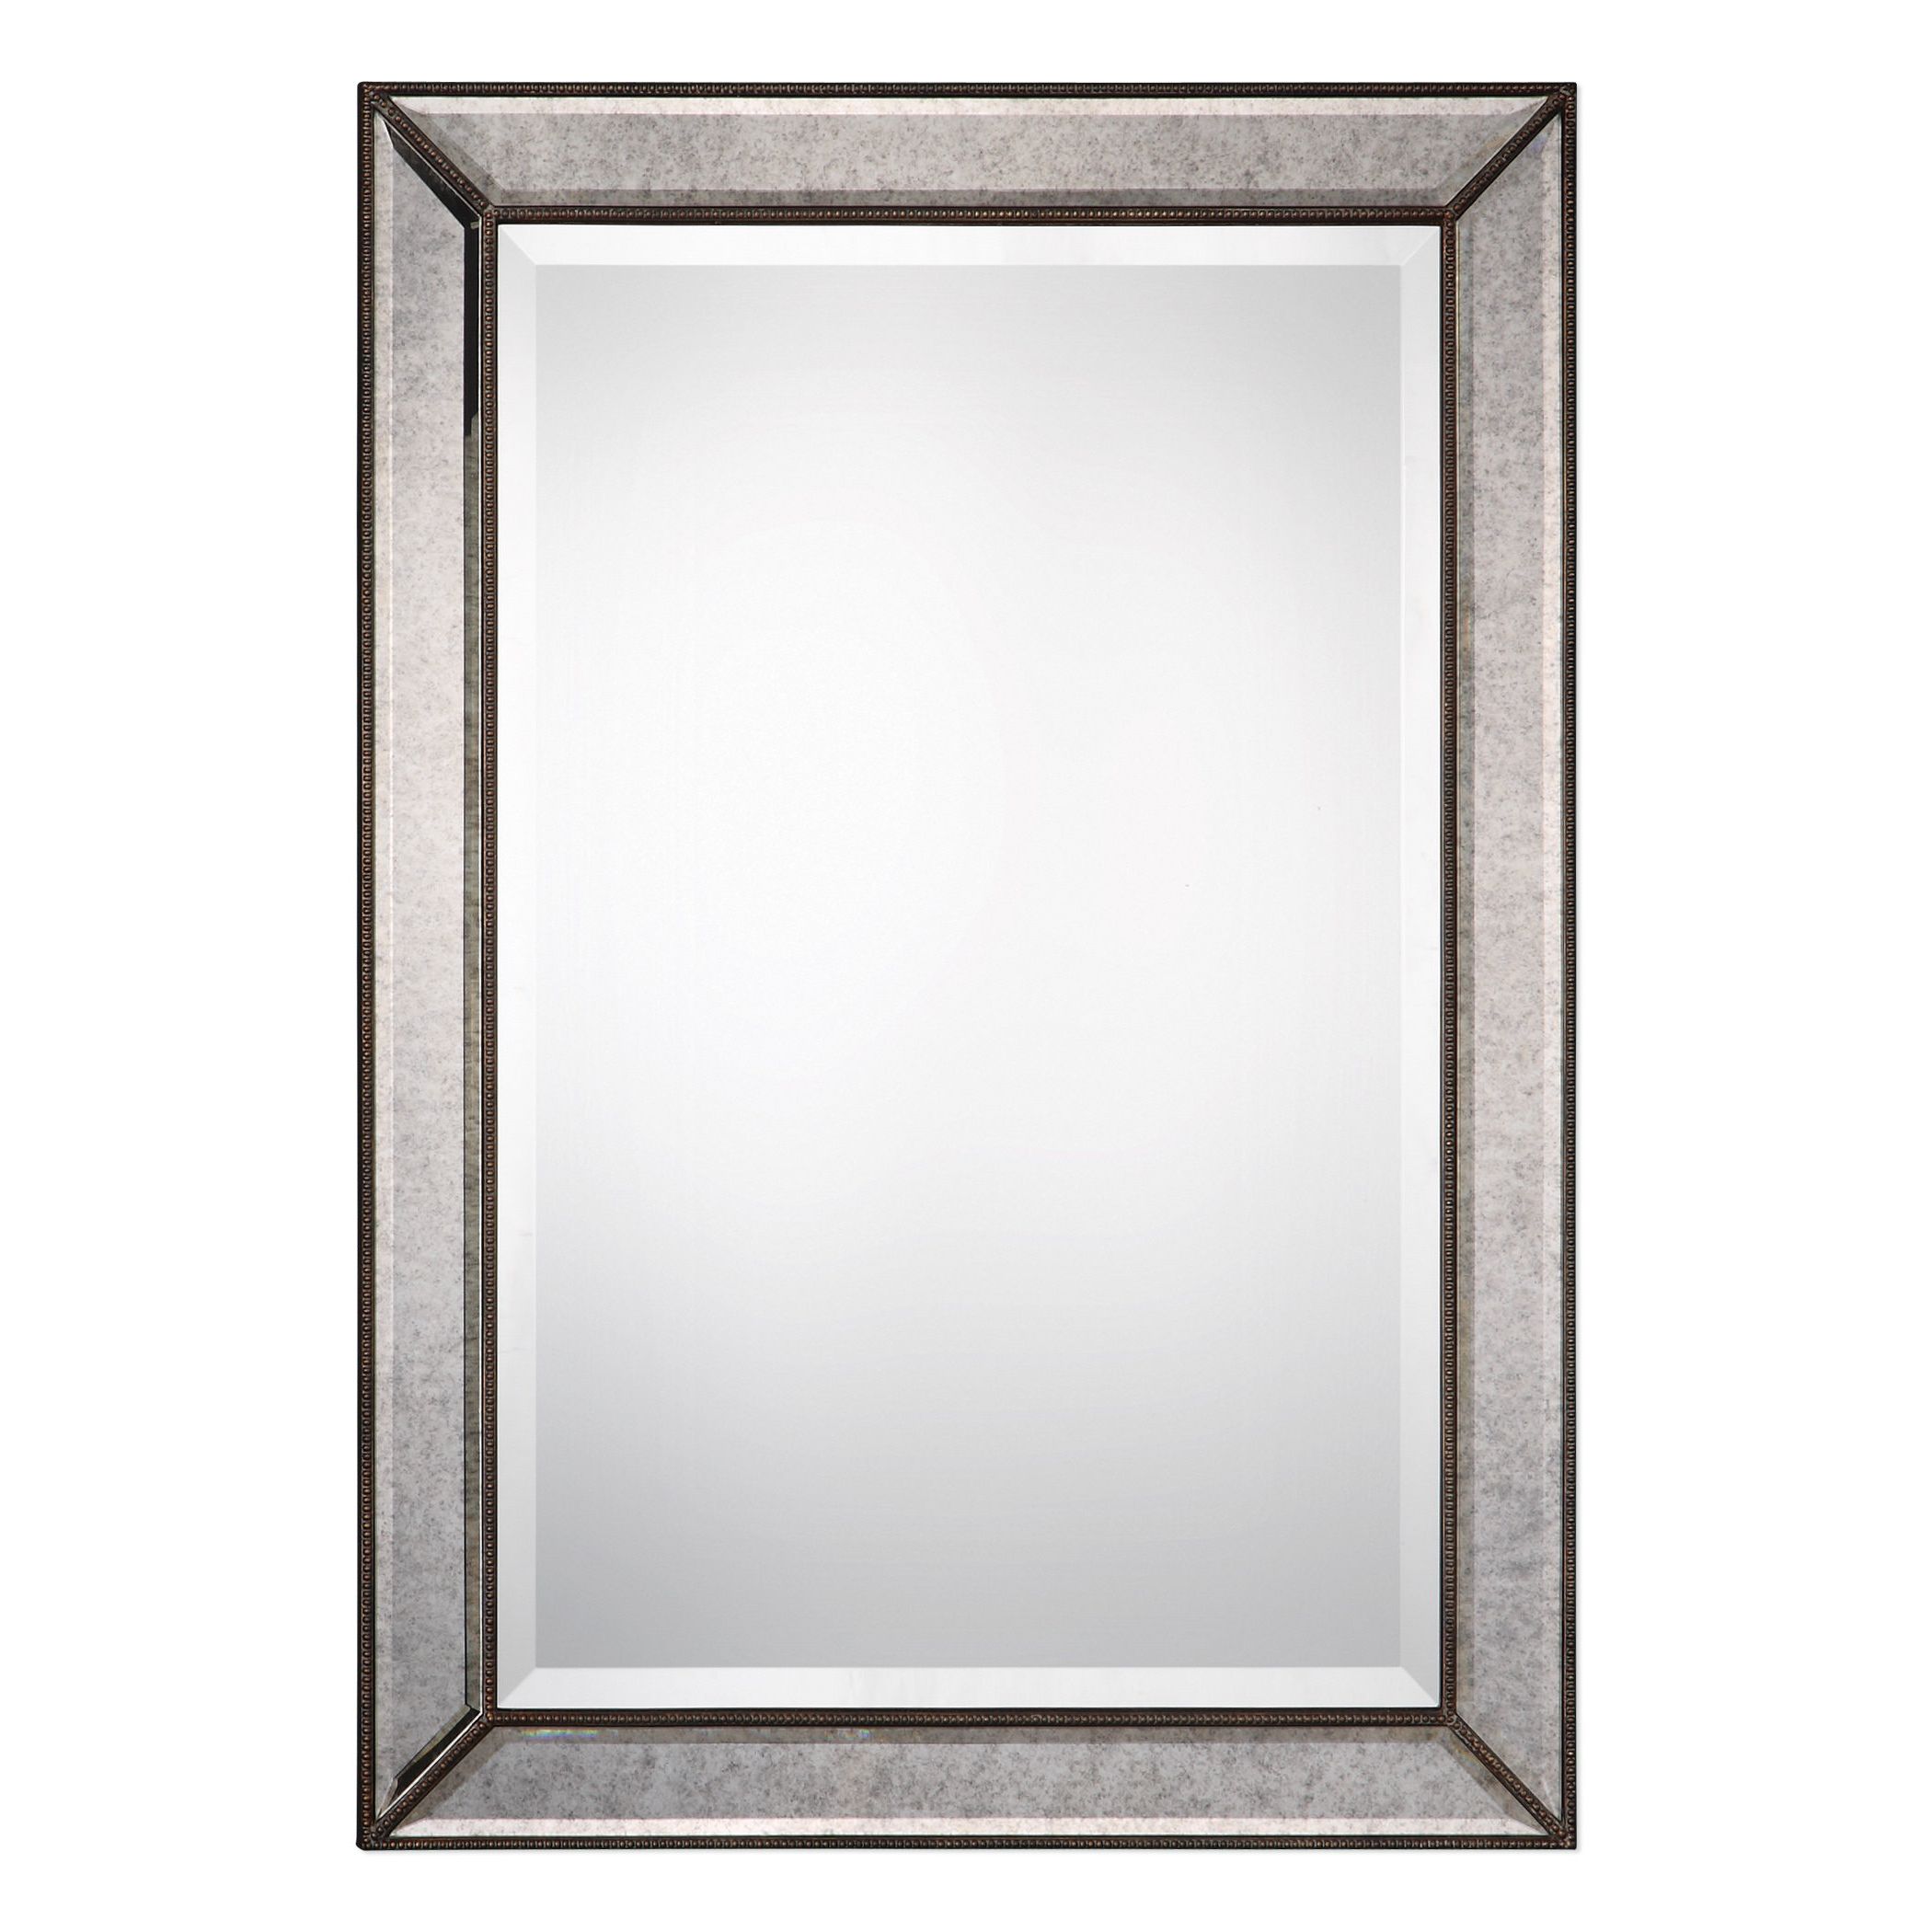 Maude Accent Mirrors Throughout Most Recently Released Marsha Traditional Rectangle Mdf/mirror Framed Accent Mirror (View 4 of 20)